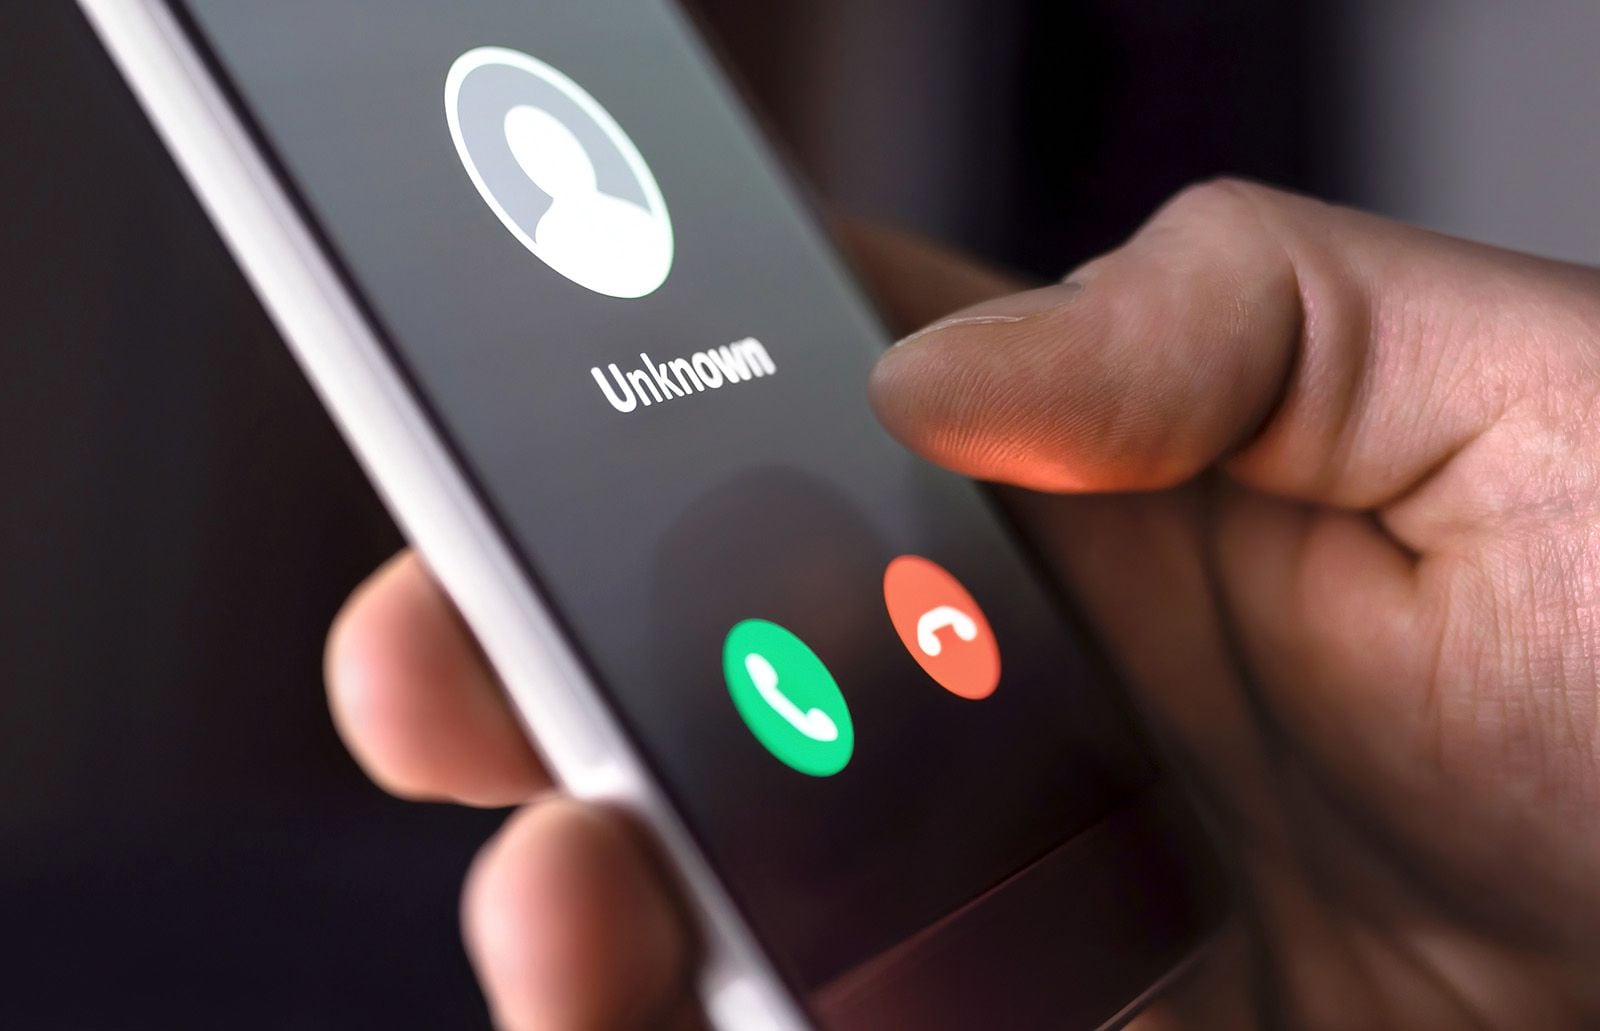 The FCC is trying something new to stop spam calls from abroad, reports Watchdog Dave Lieber.